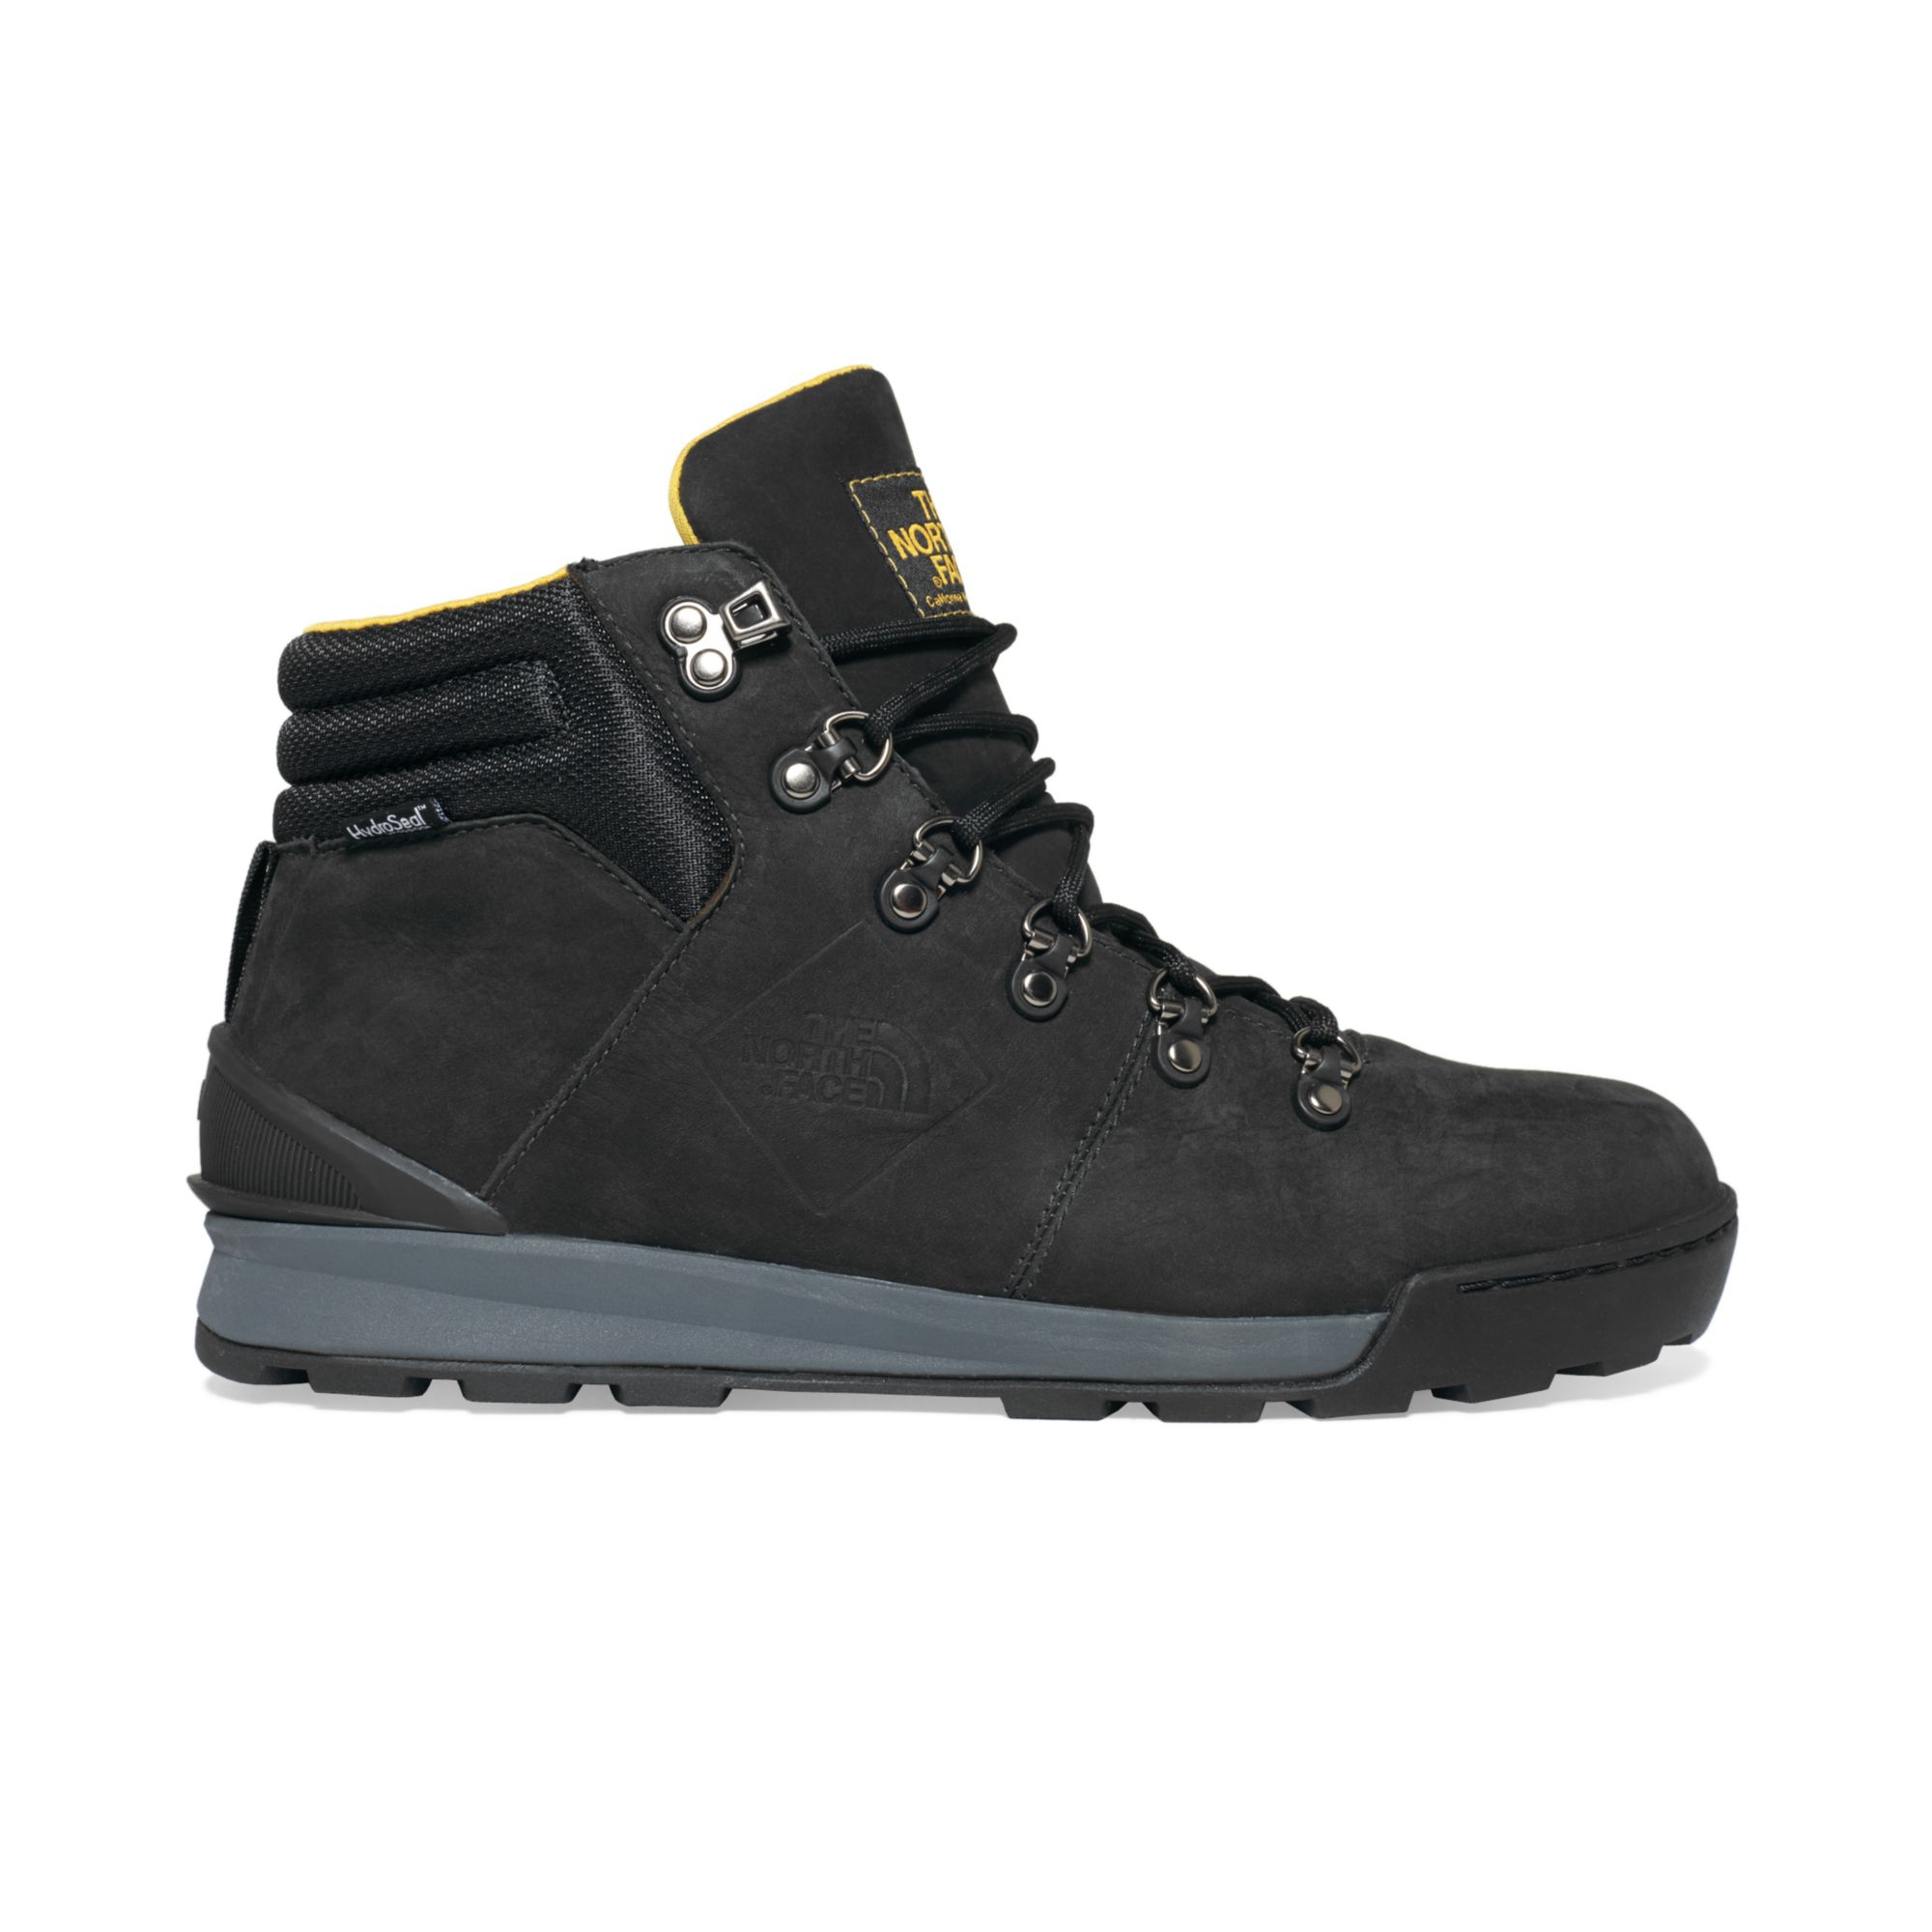 The North Face Backtoberkeley 84 Waterproof Boots in Black for Men - Lyst